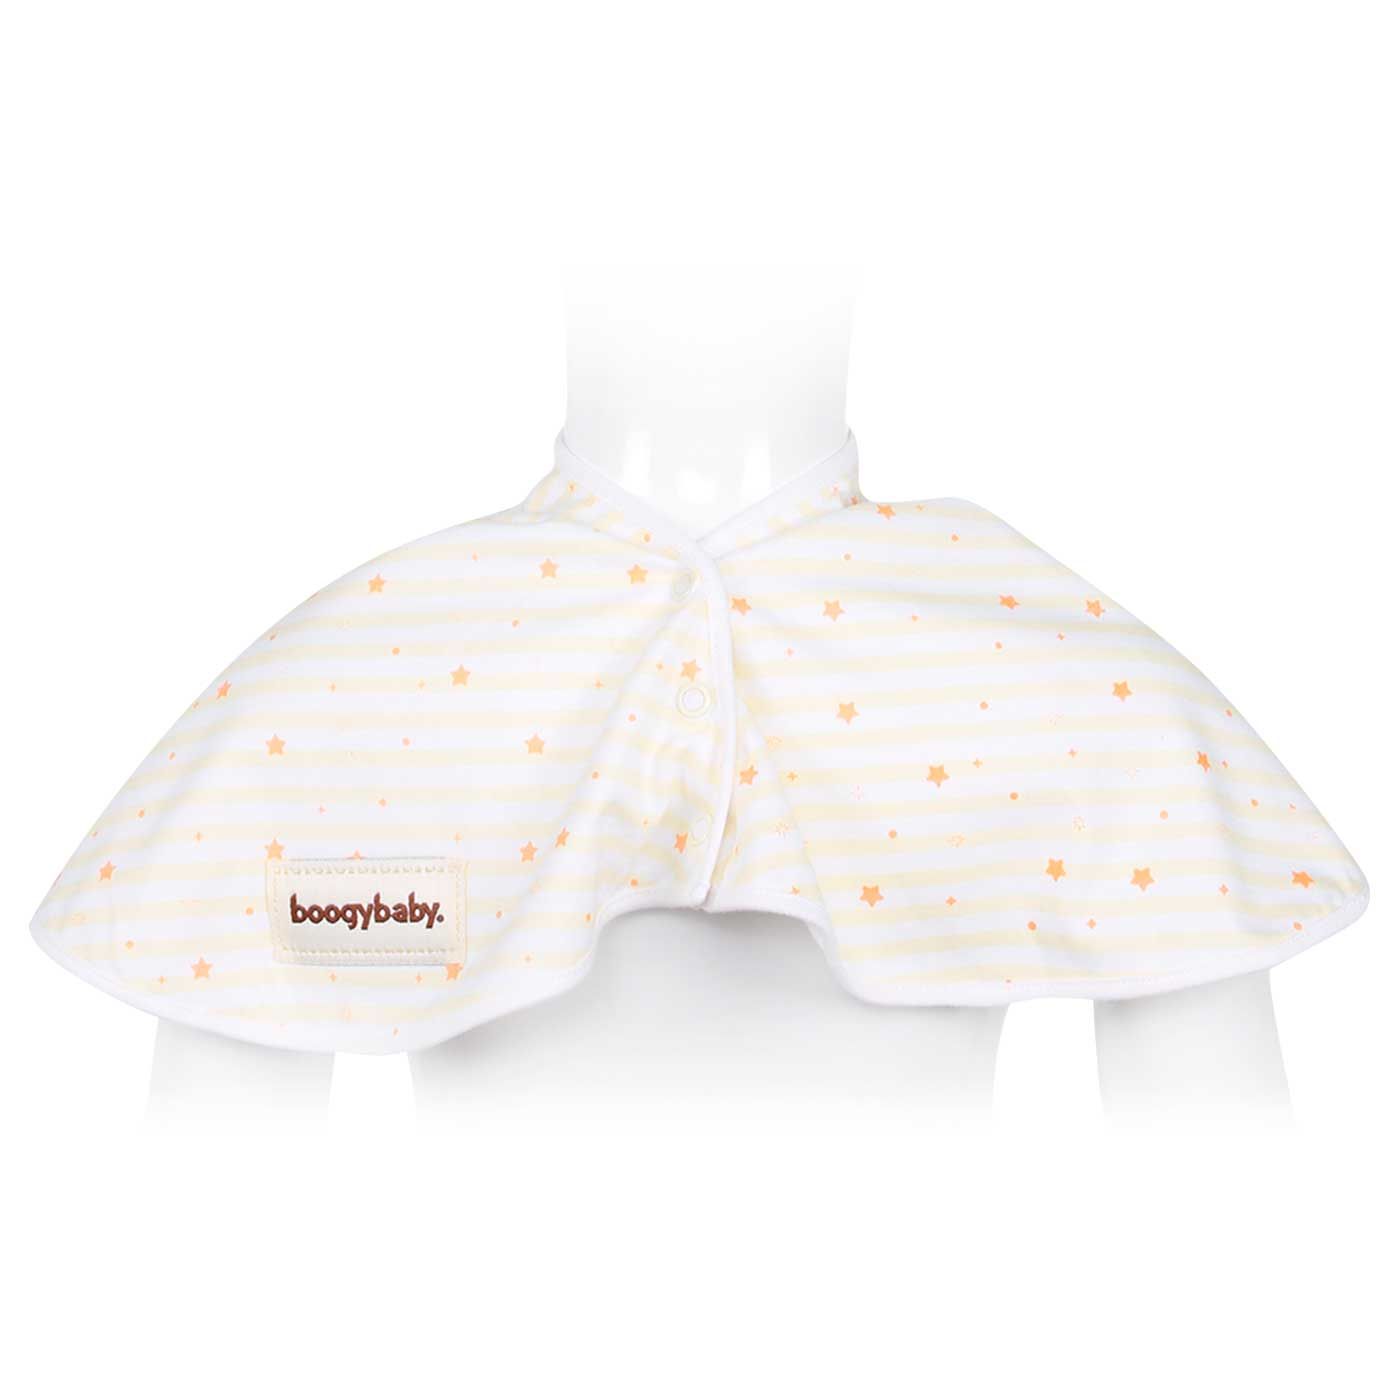 Boogybaby Pipi Burping Cloth - Stardust (Isi 3) - 7